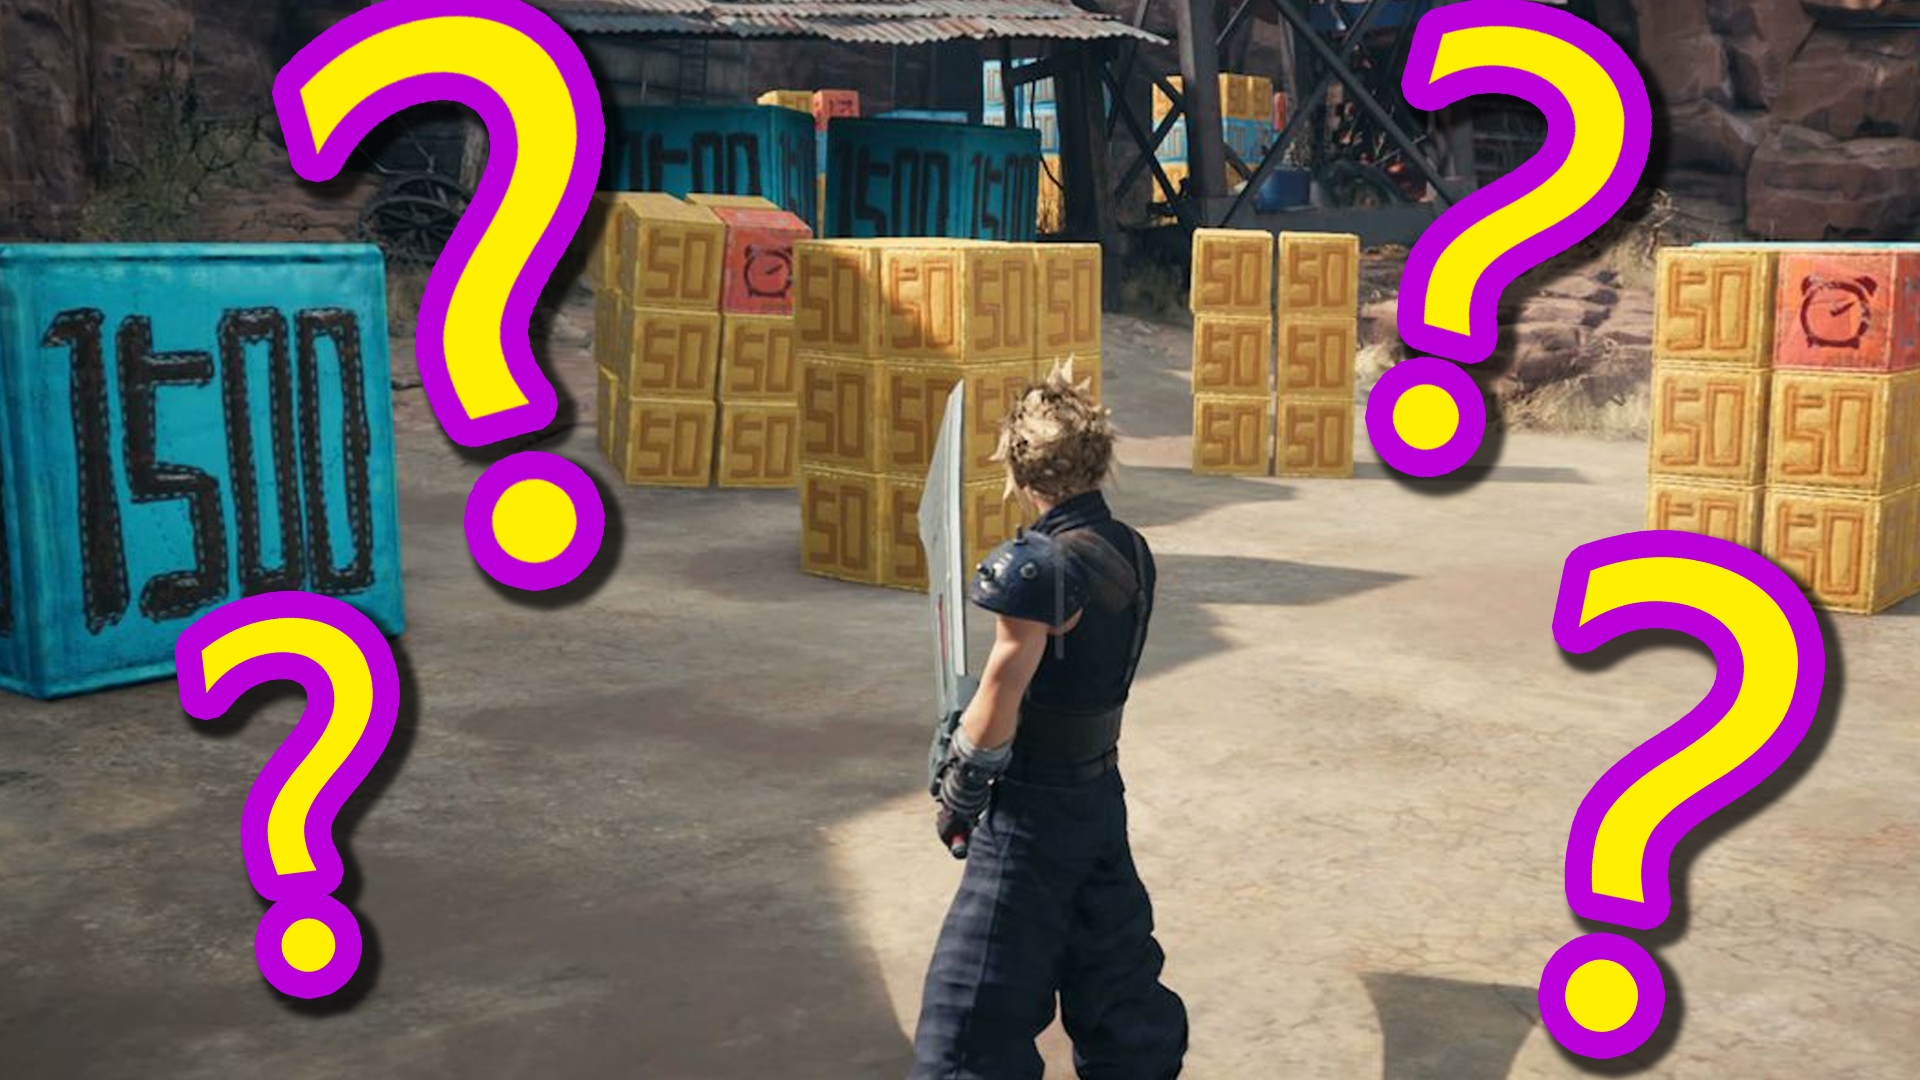 9 Questions I Have About That Weird Box Breaking Game In Final Fantasy 7 Remake